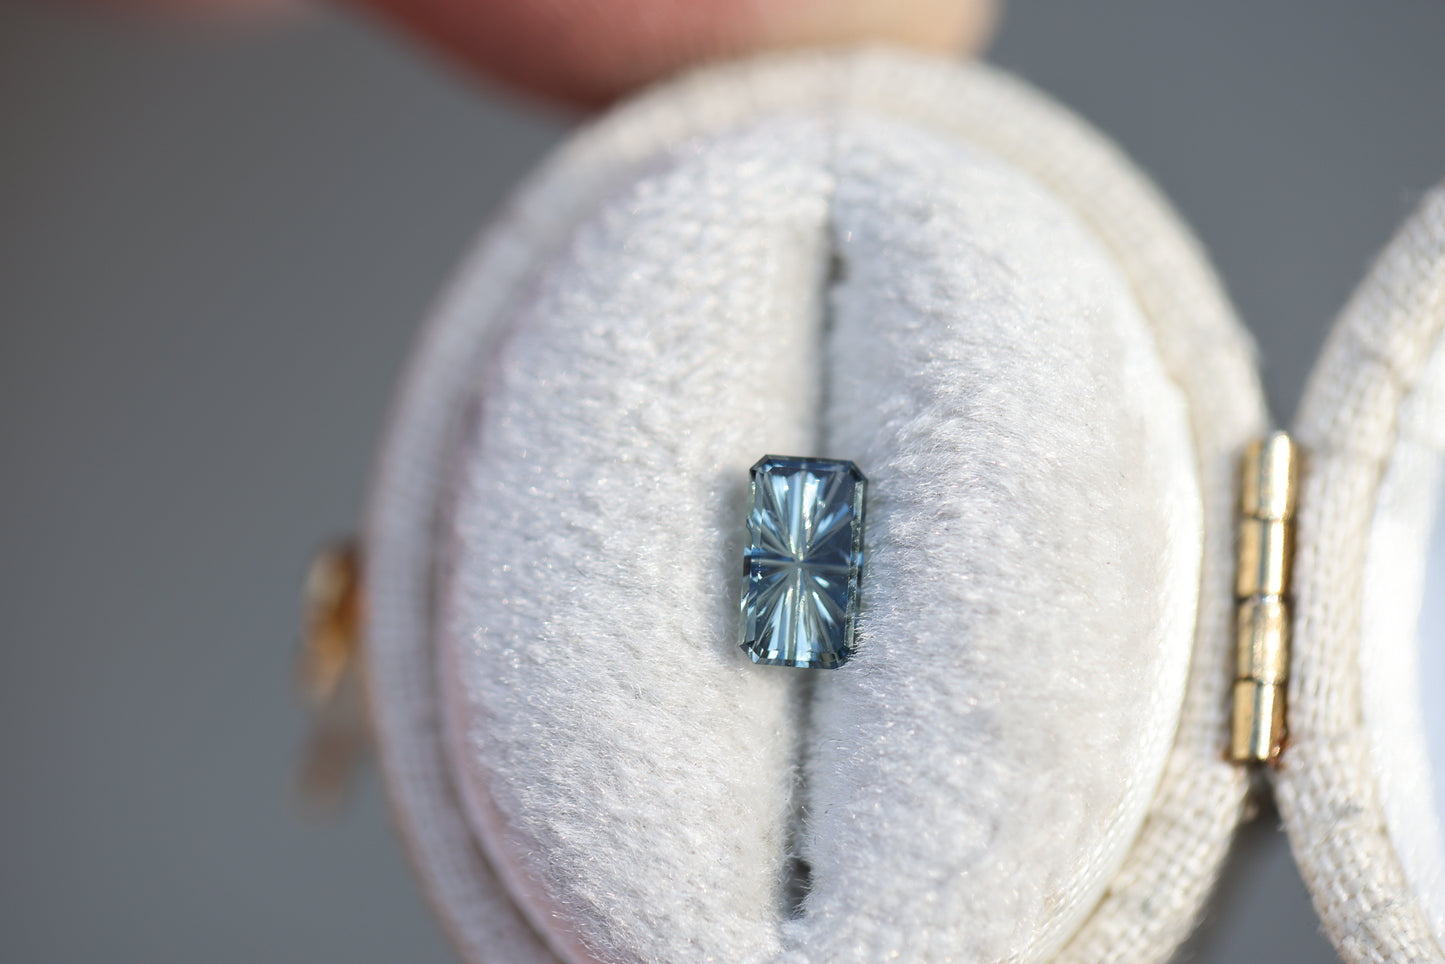 .52ct rectangle teal sapphire - Starbrite cut by John Dyer